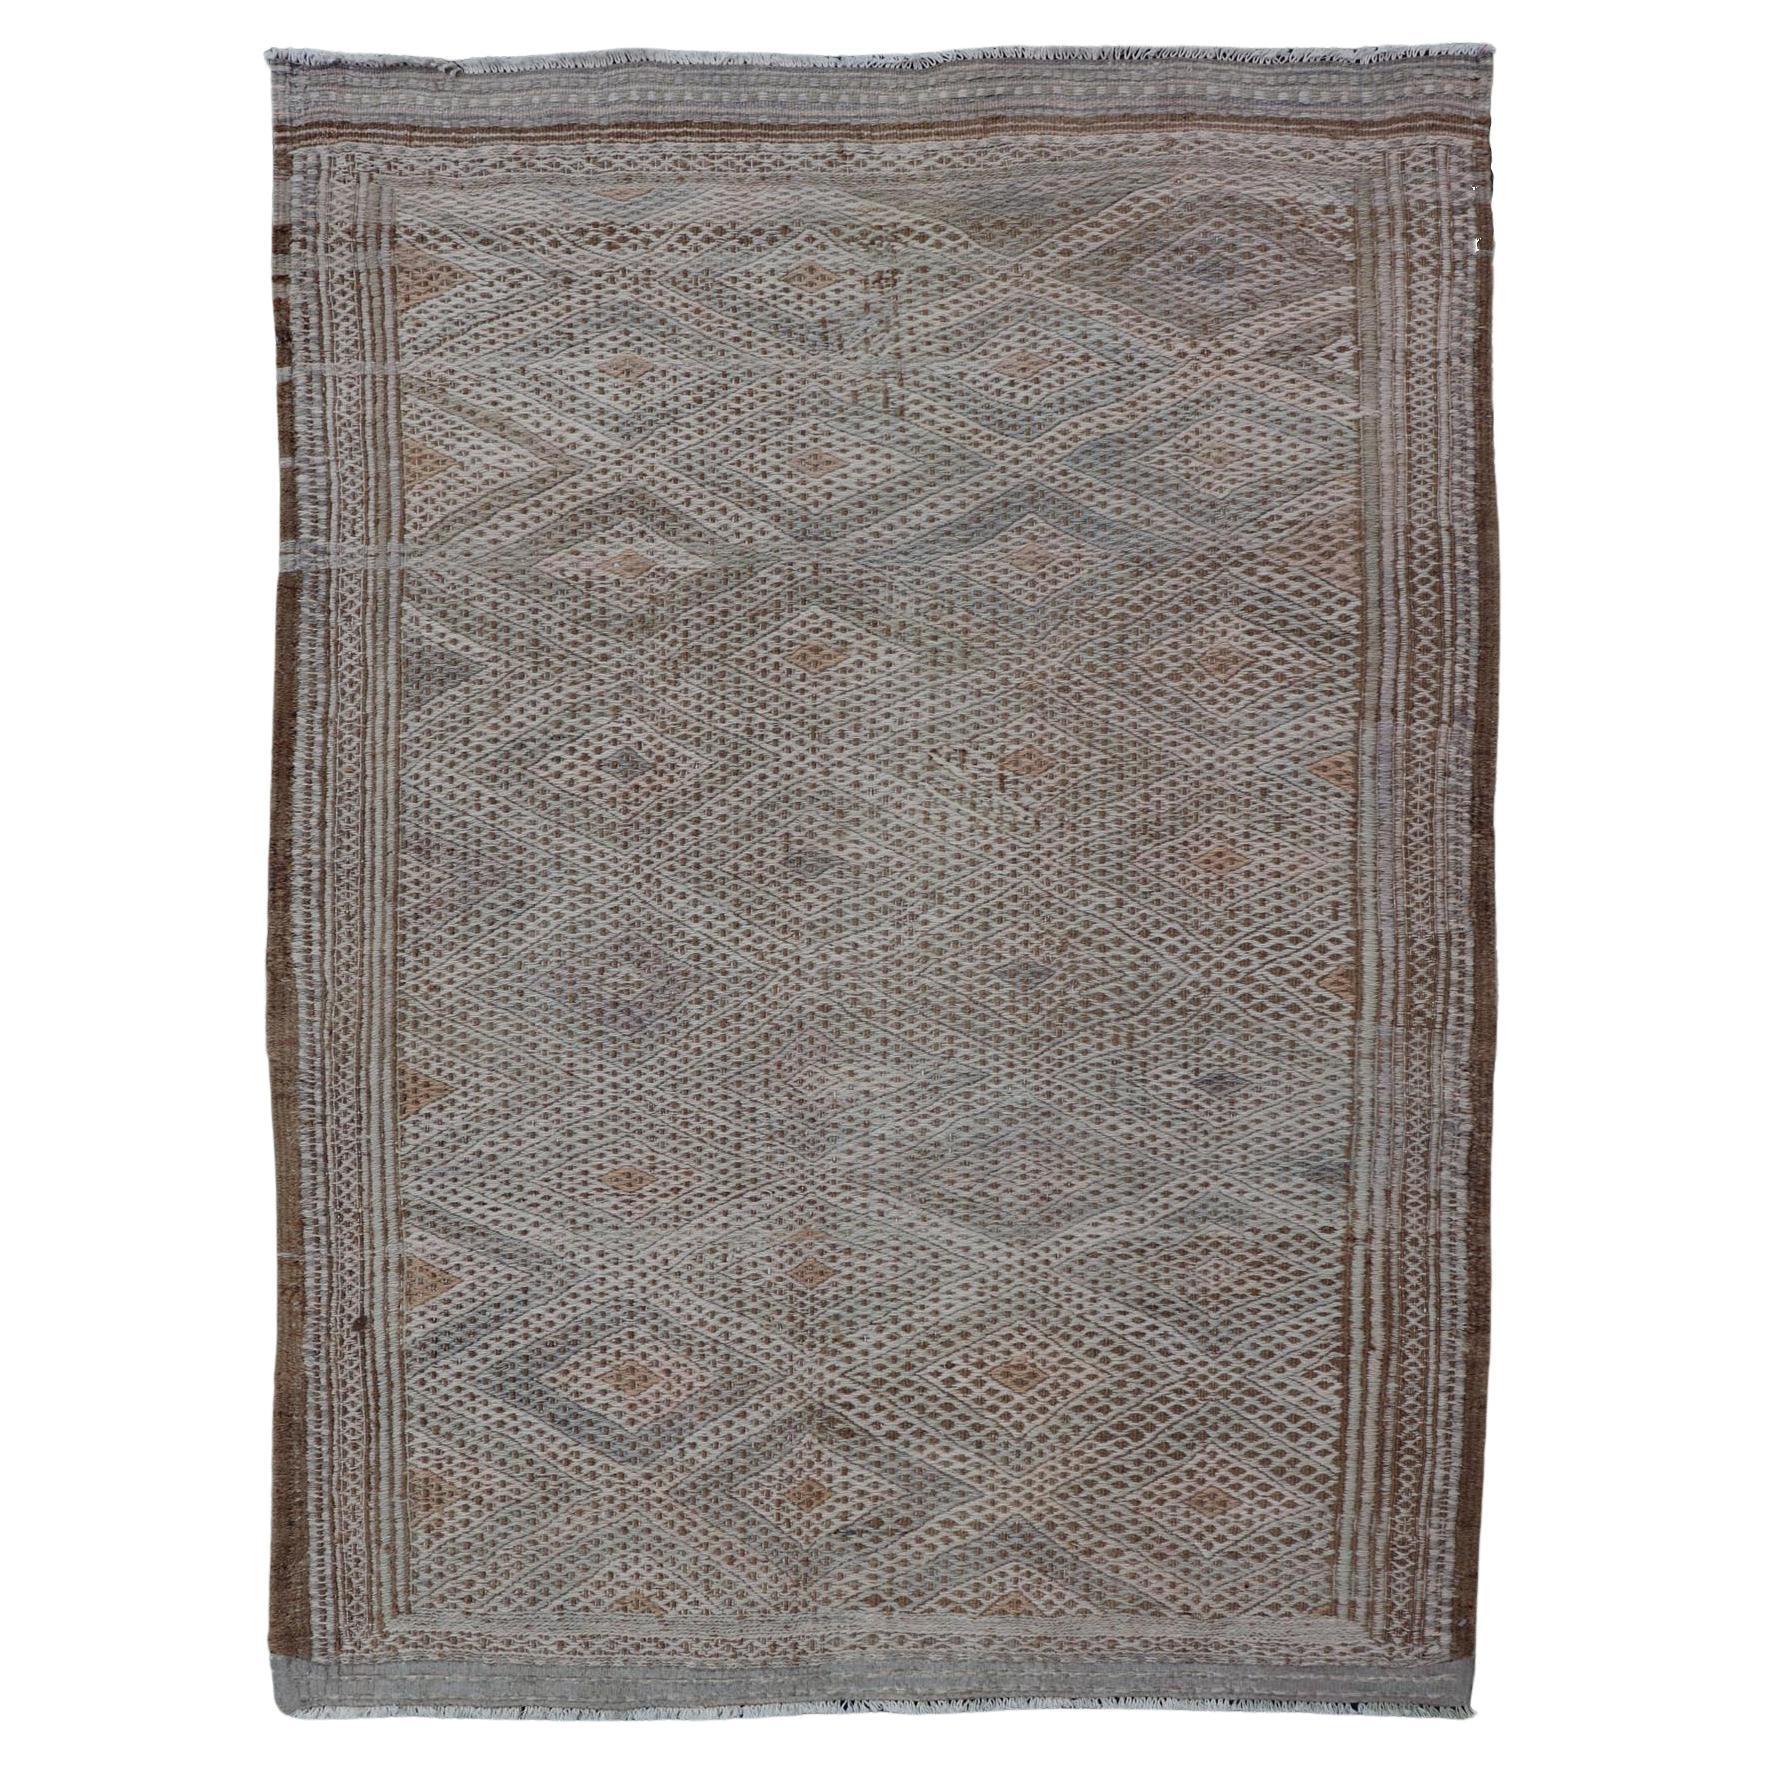 Tan and Cream Vintage Turkish Embroidered Rug with Geometric Diamond Design For Sale